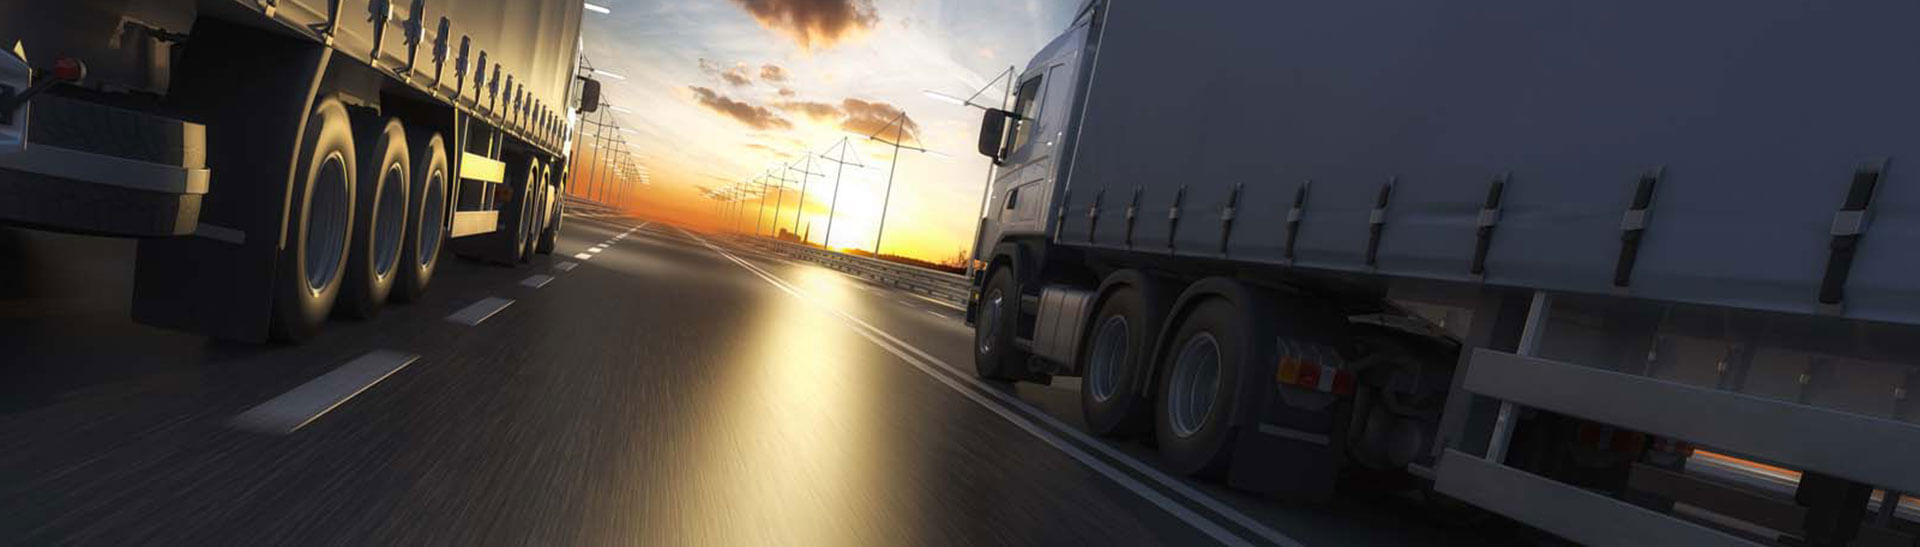 Lebanon Trucking Company, Trucking Services and Freight Forwarding Services